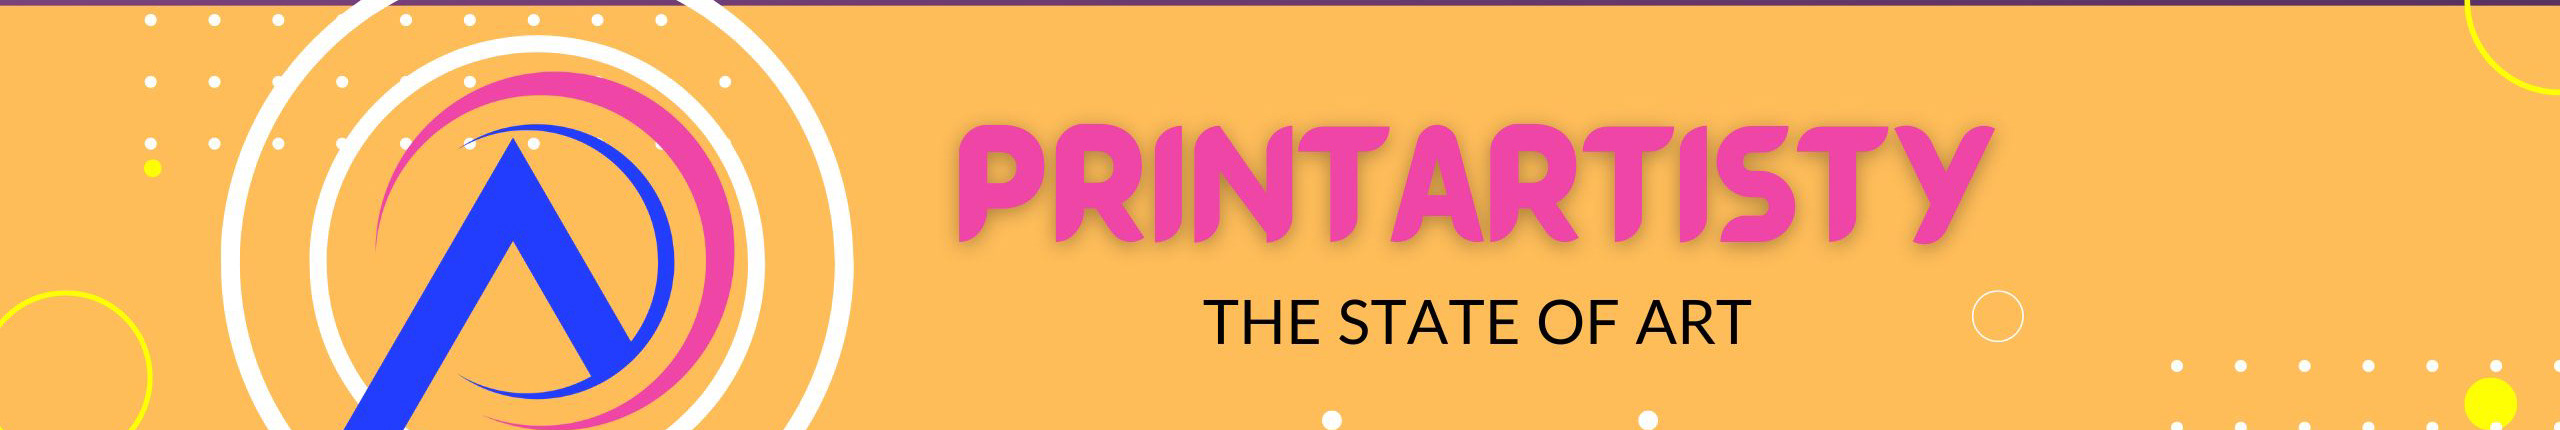 printartisty The State Of Art's profile banner